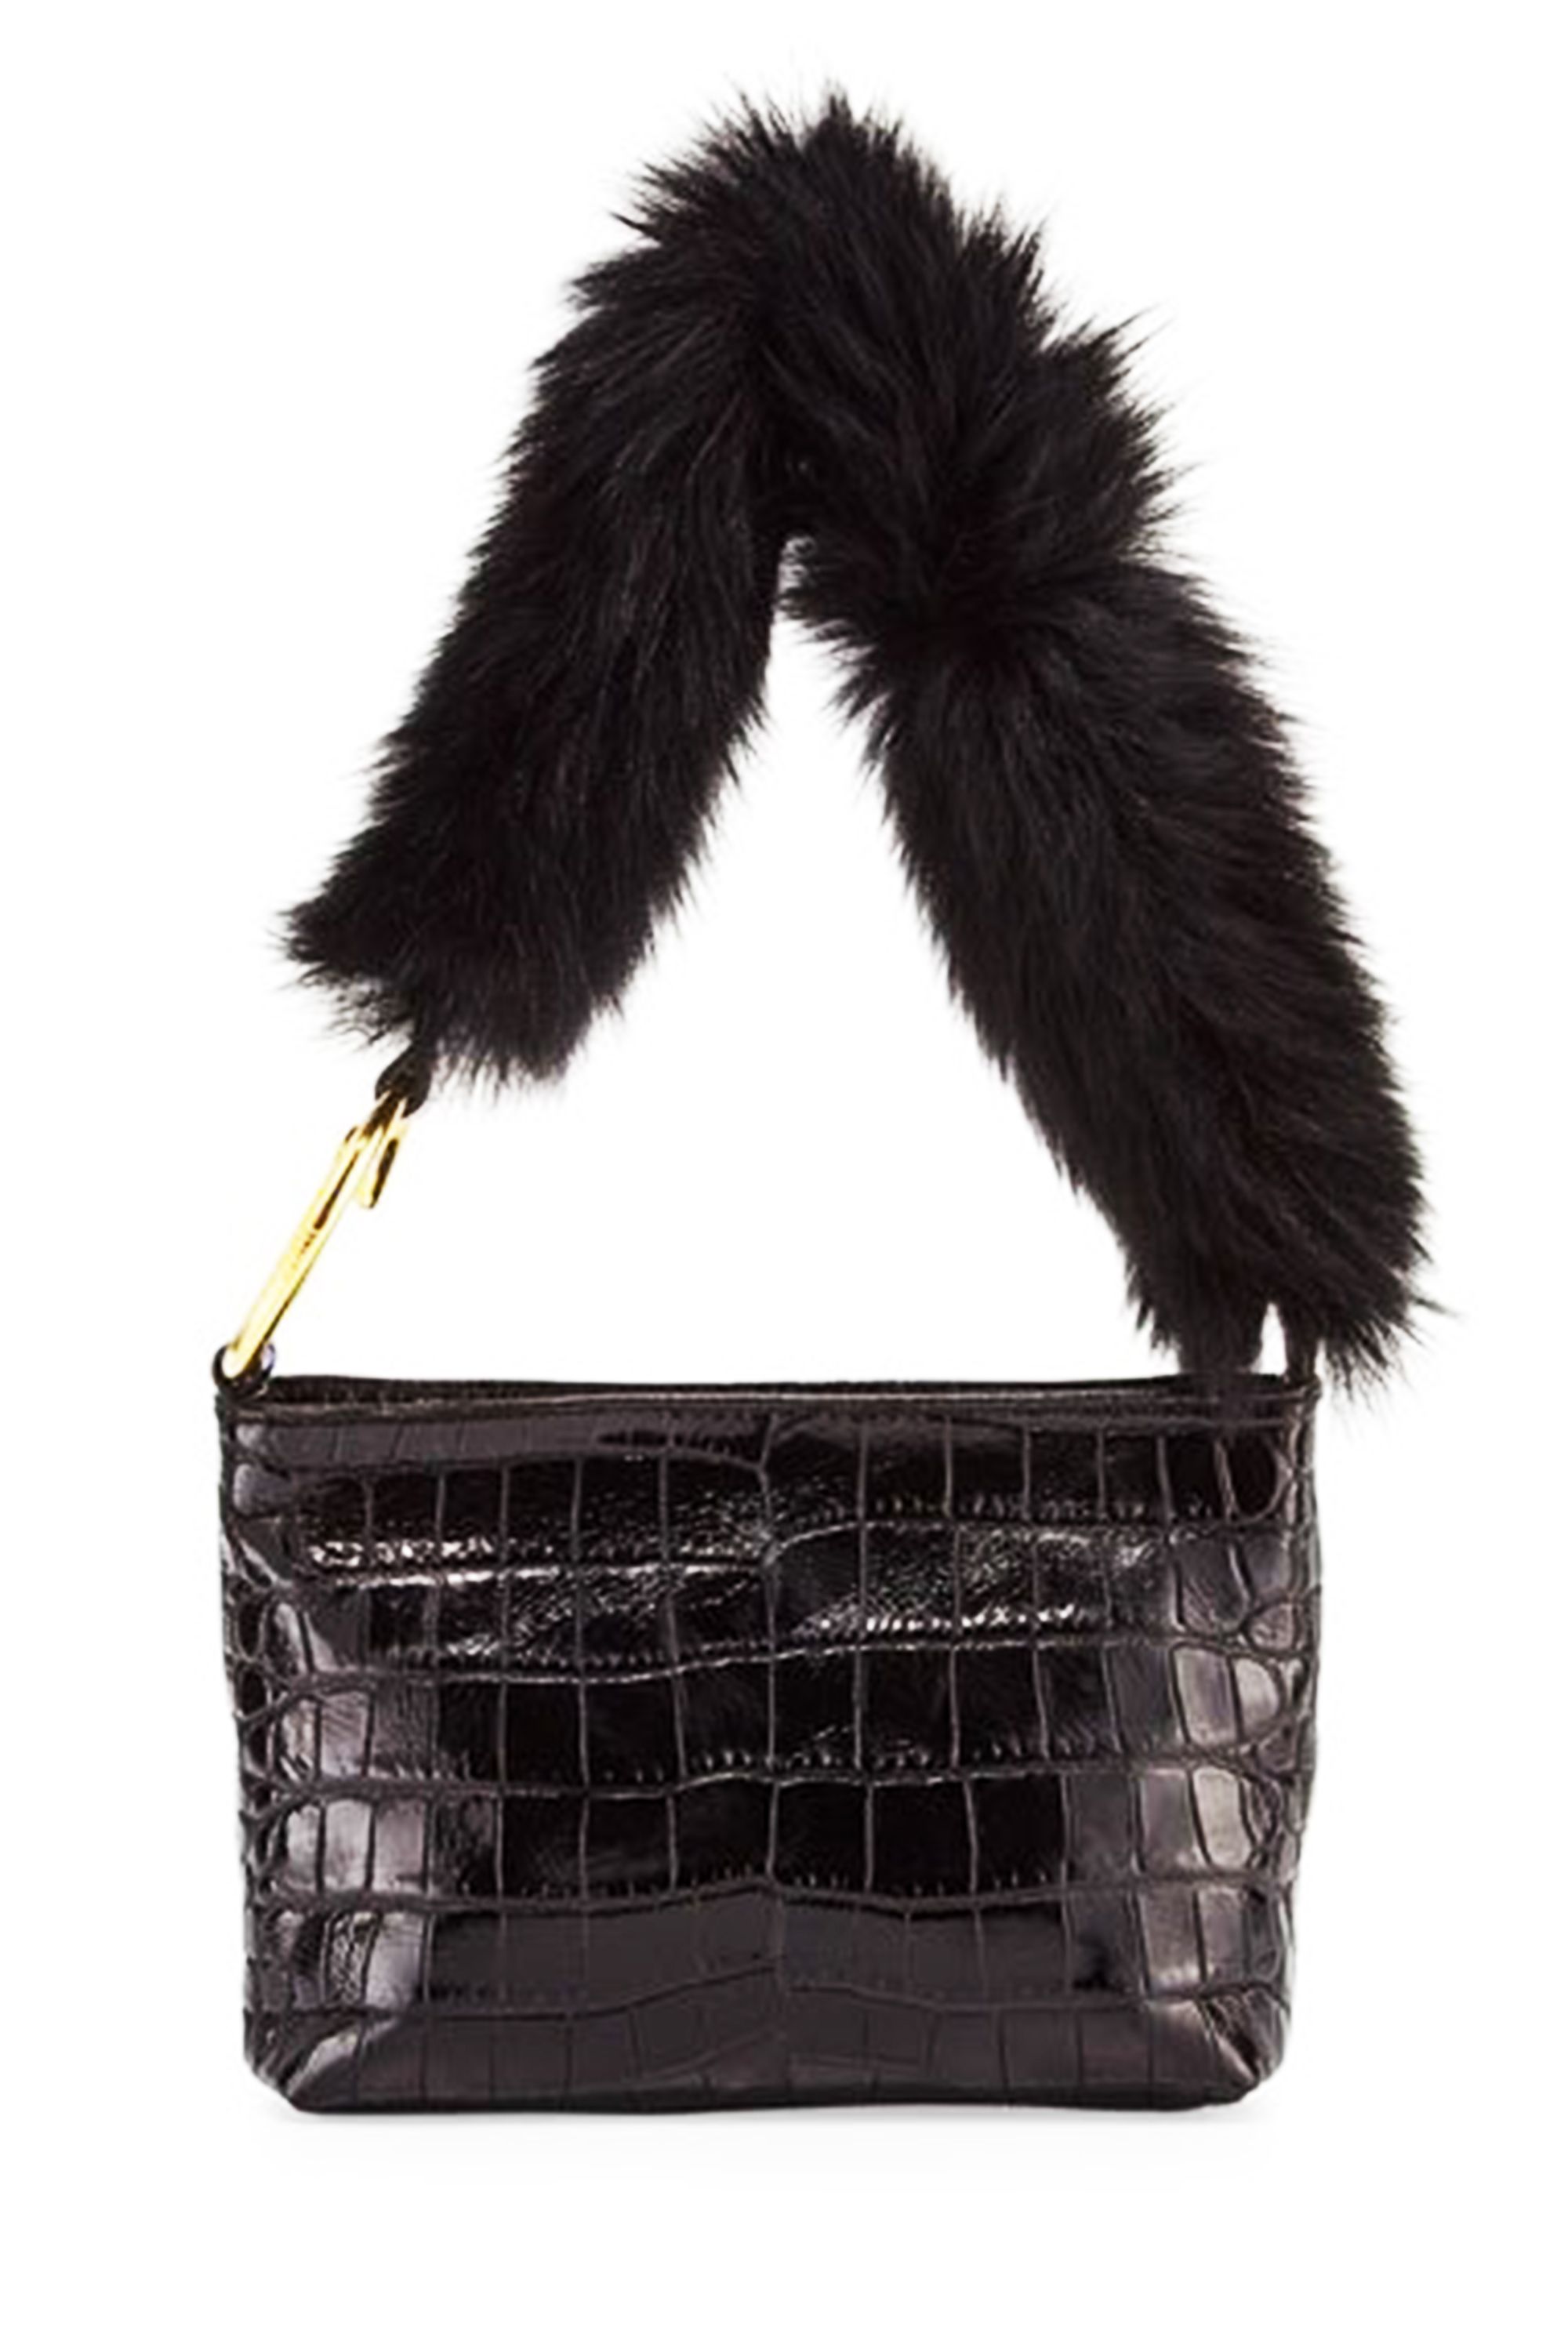 11 Pouch Bags That Will Make You Feel Fancy